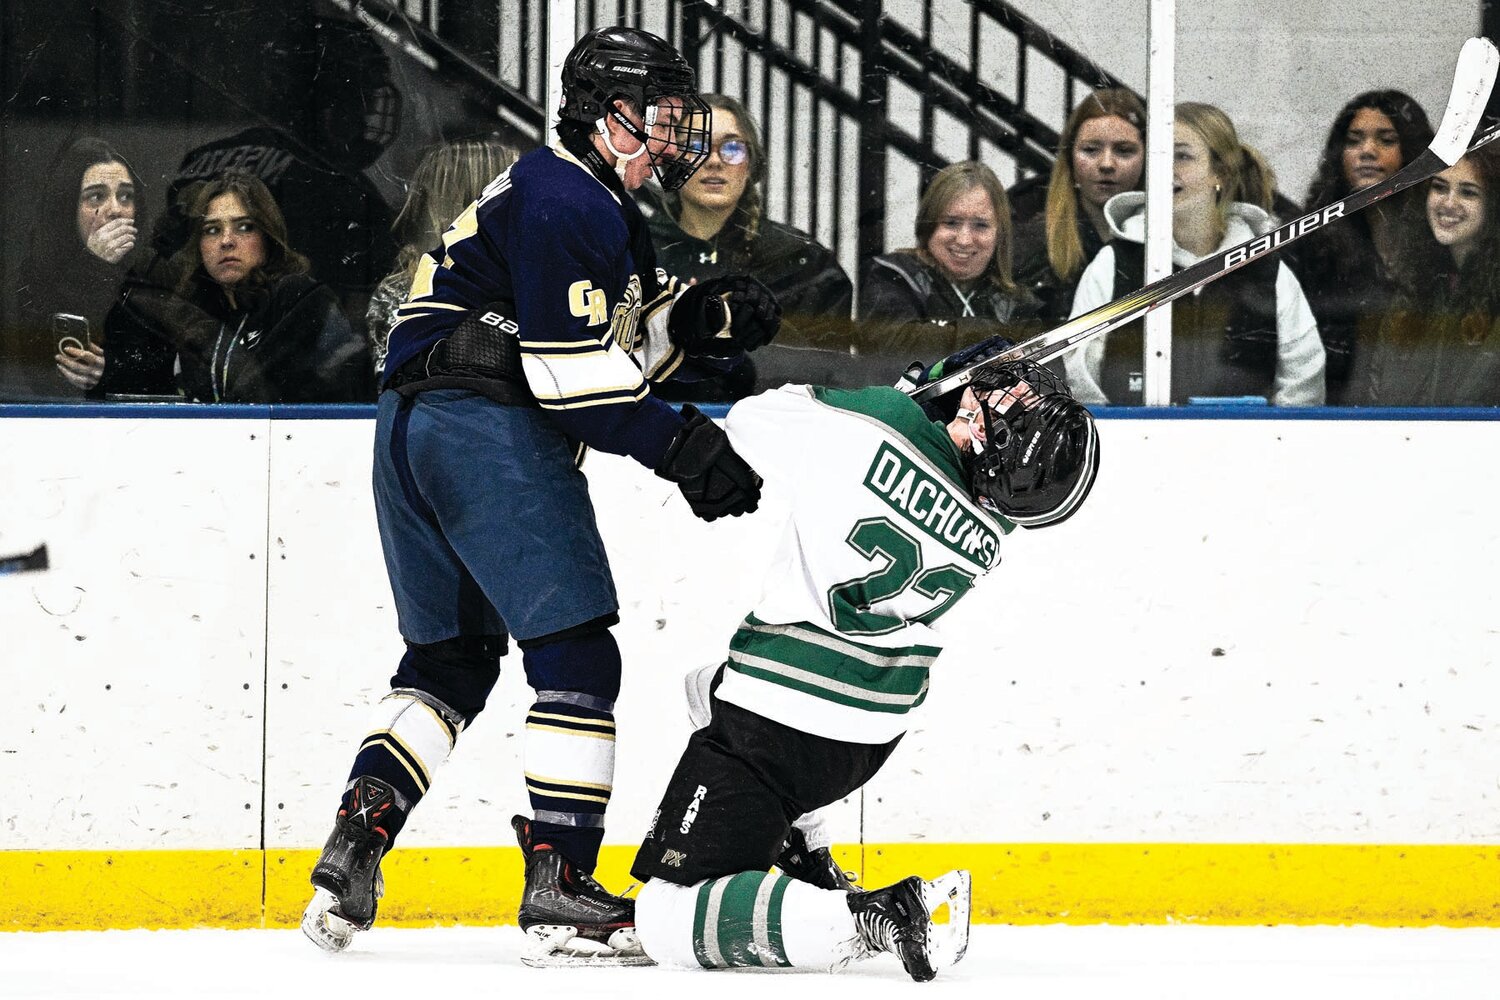 Pennridge’s Shane Dachowski gets a stick to head while battling Council Rock South’s Illia Mukhin in the corner during the third period.